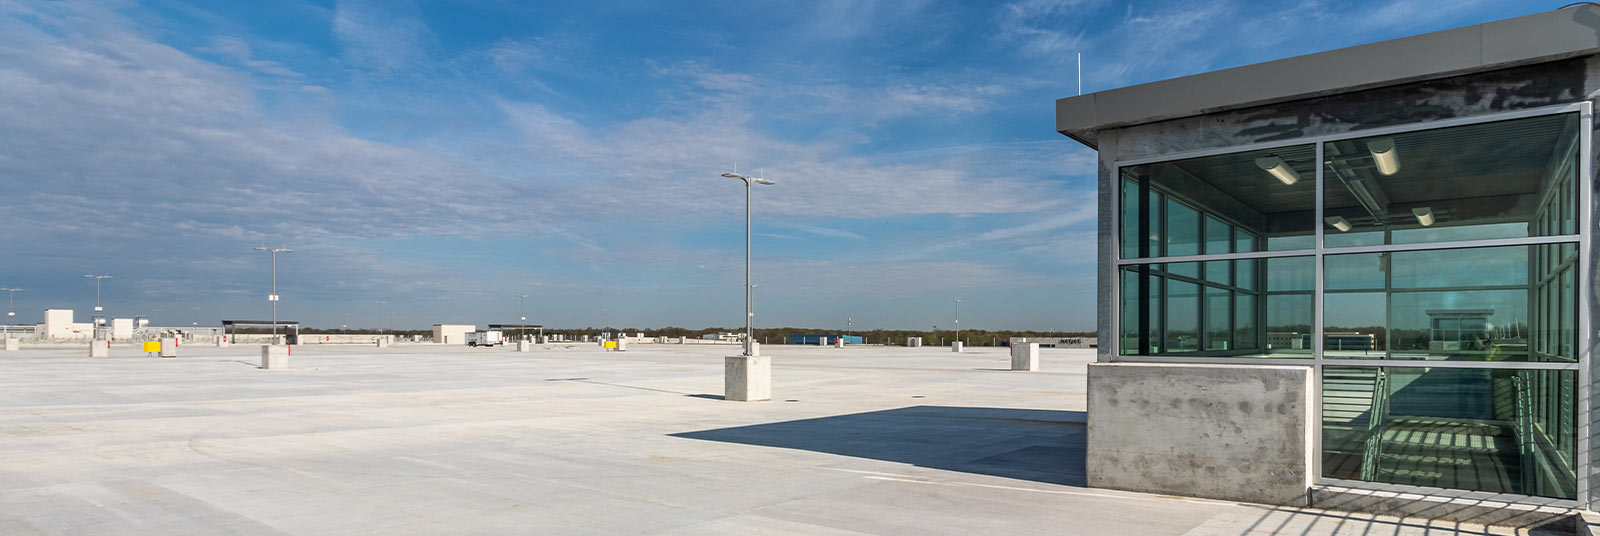 Finished rooftop parking level at the ConRAC at John Glenn Columbus International Airport.